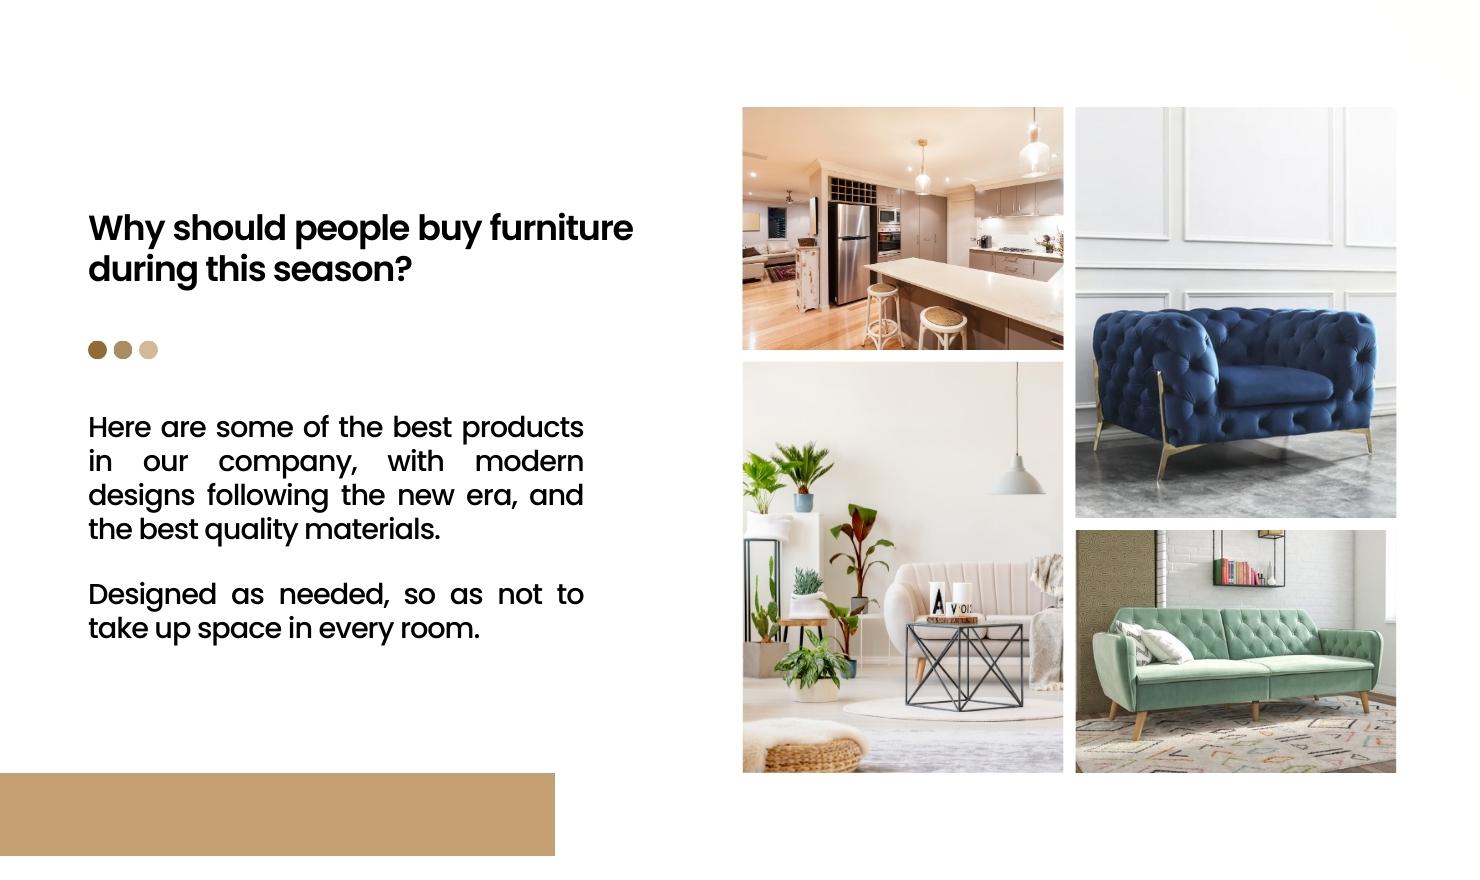 Why should people buy furniture during this season